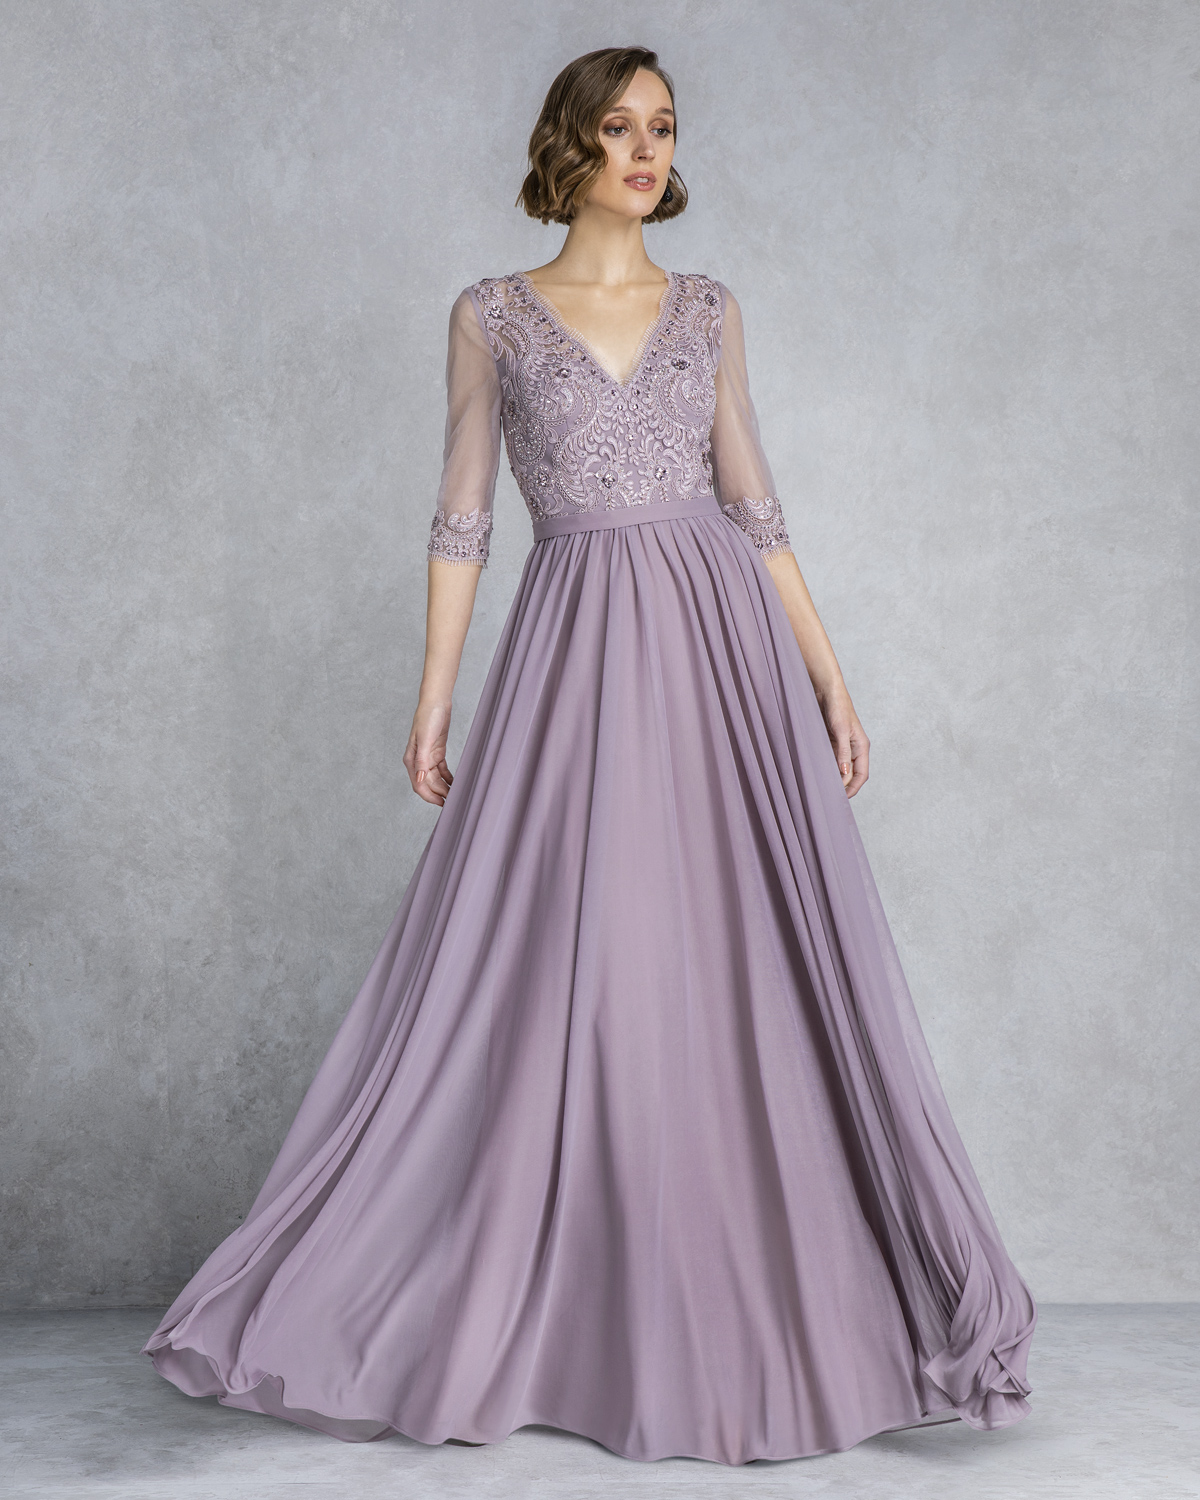 Long mother of the bride evening dress with beading and sleeves